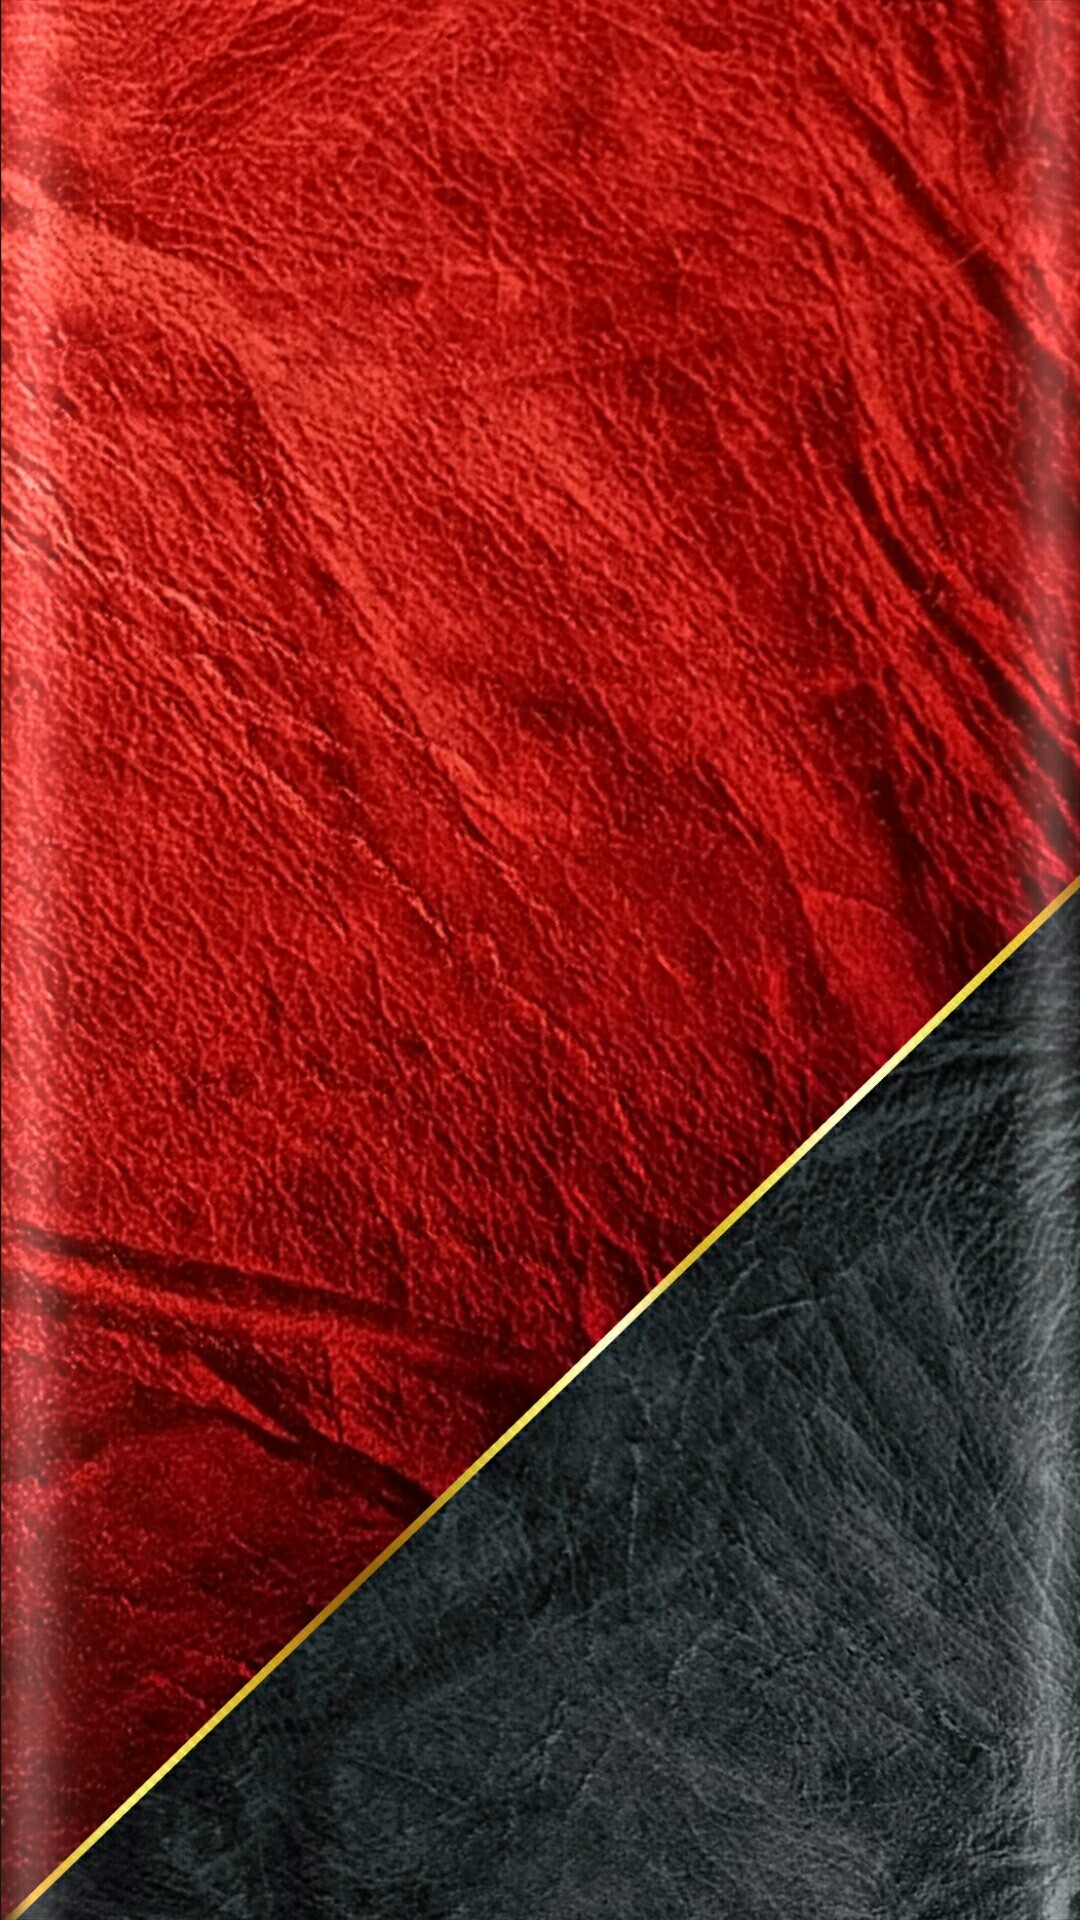 Red Red iPhone 5 Wallpaper (640x1136)